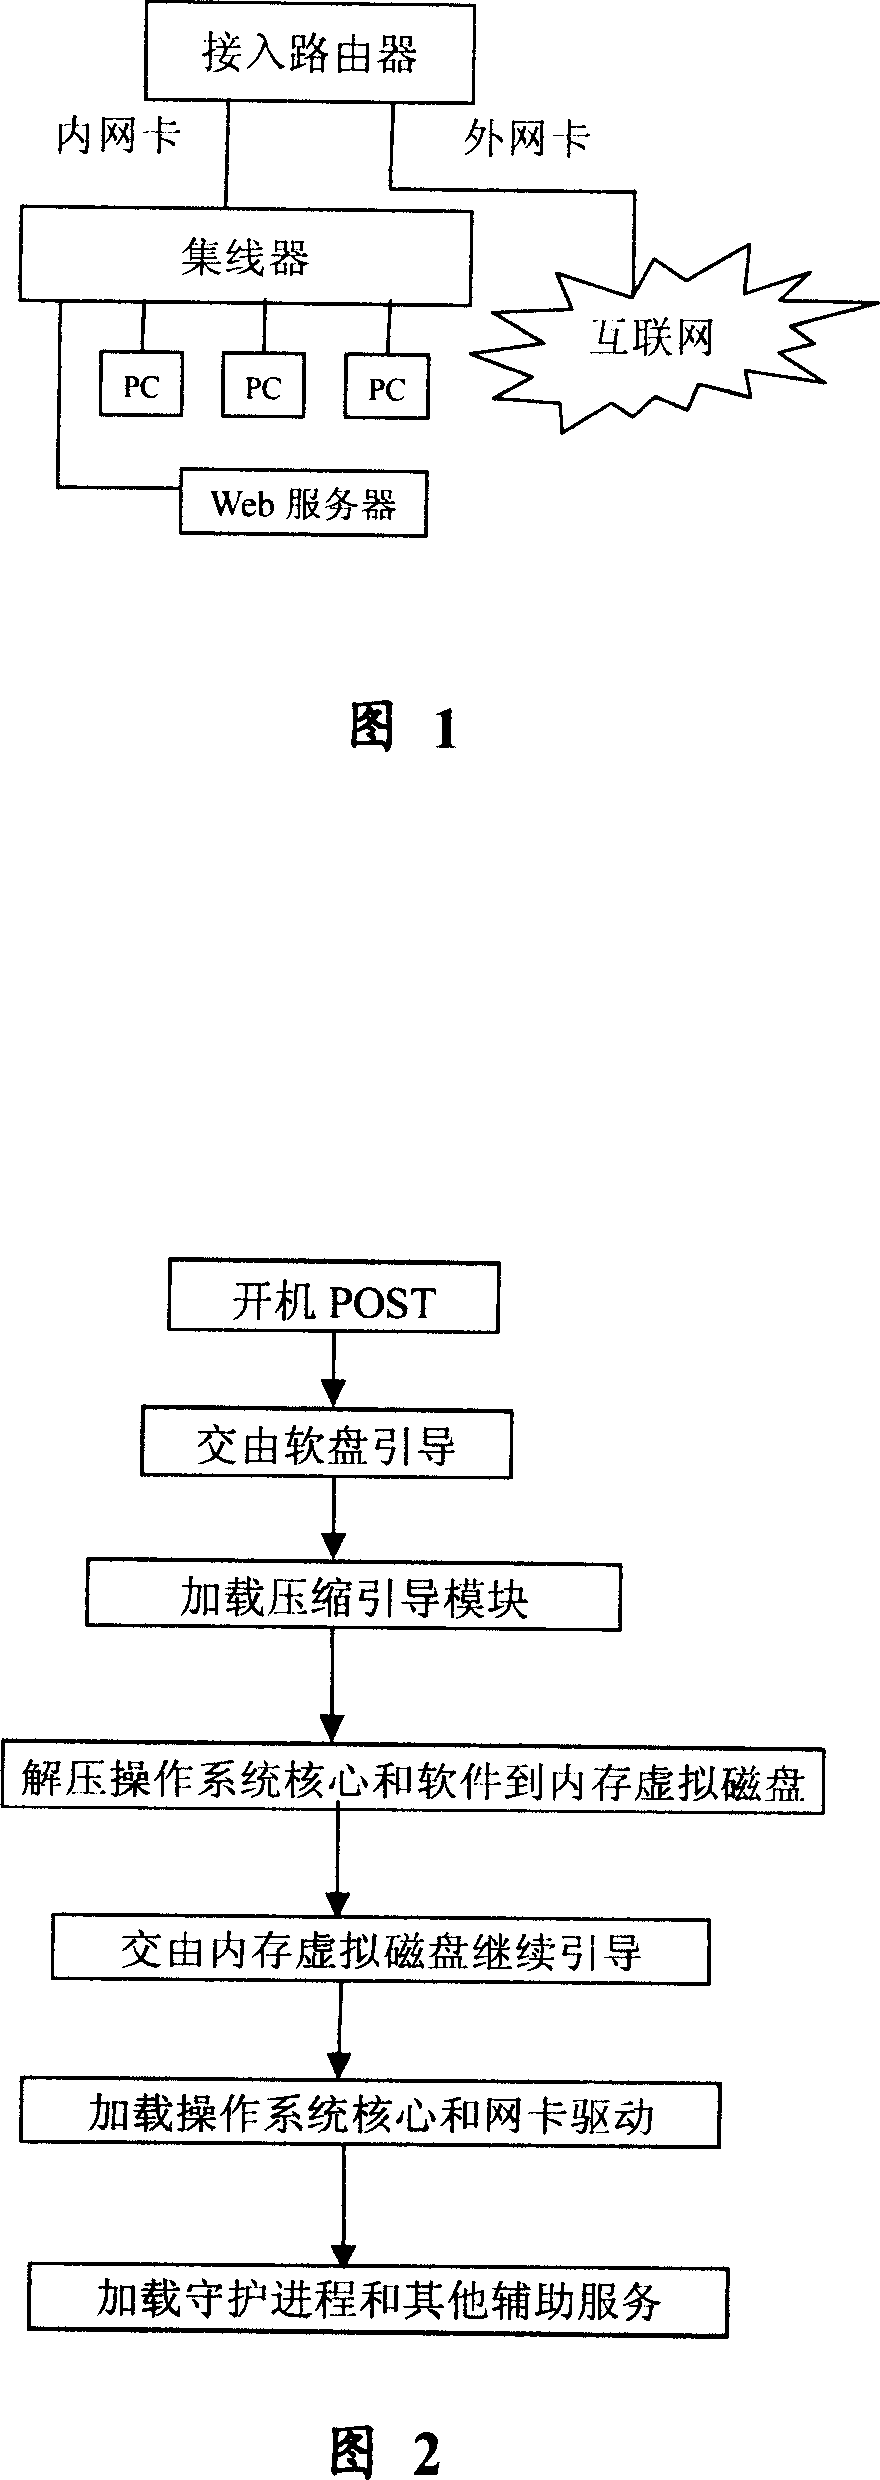 Accessing route device install configuring method based on personal computer hardware equipment